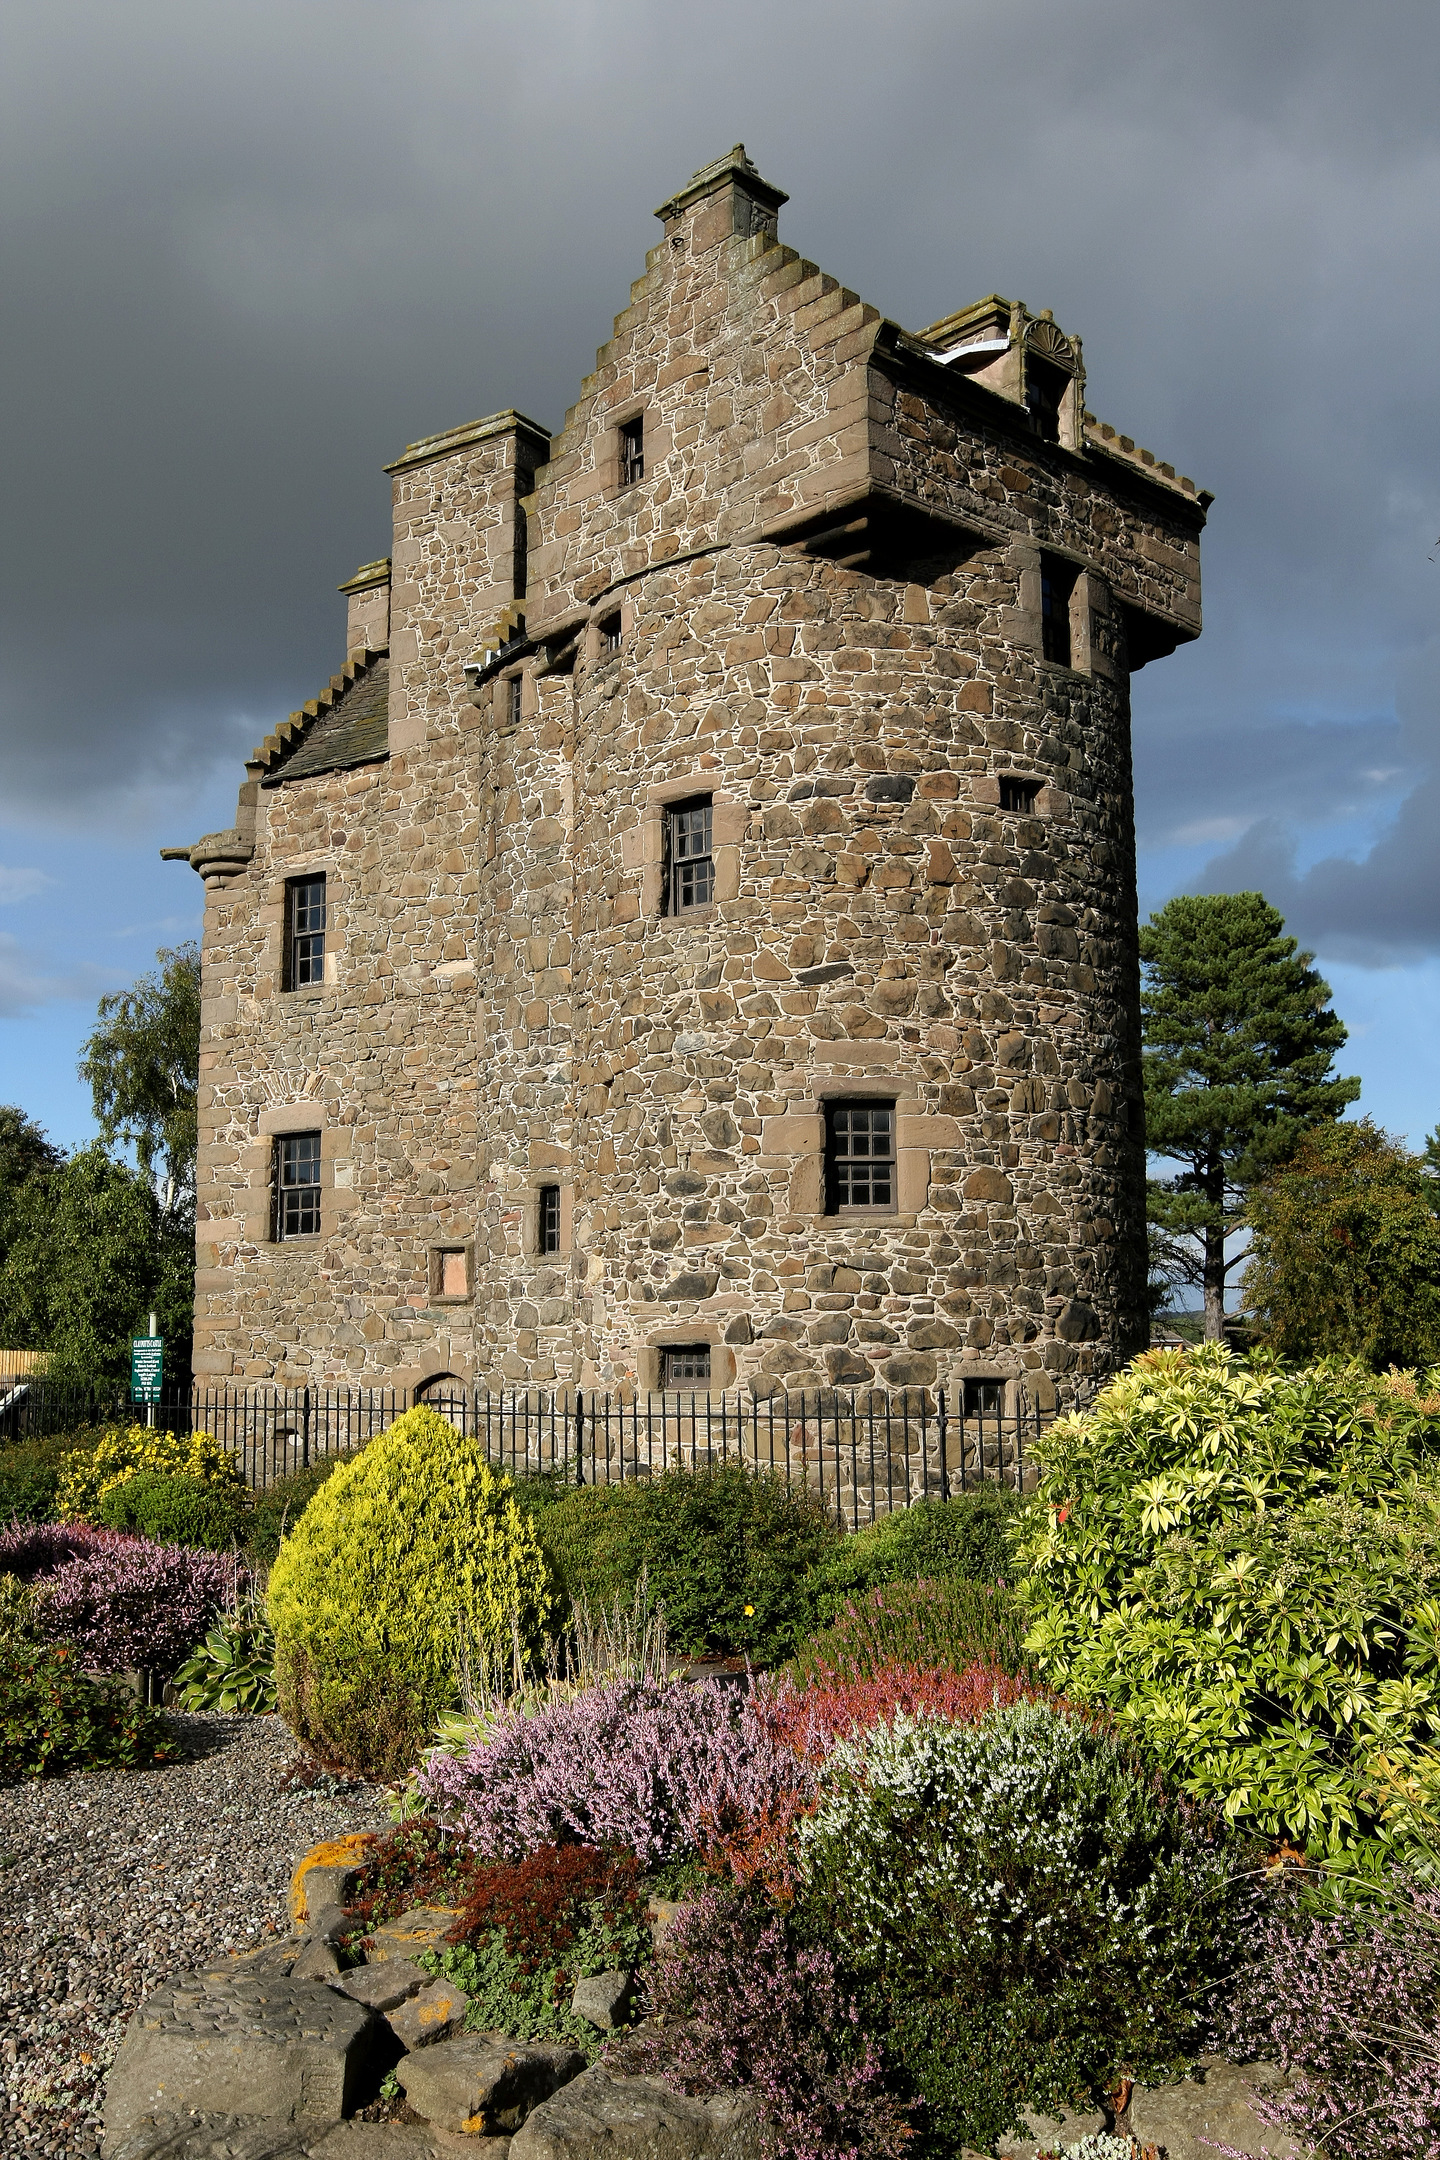 Claypotts Castle in Broughty Ferry looks picturesque - but would you want to spend the night there?